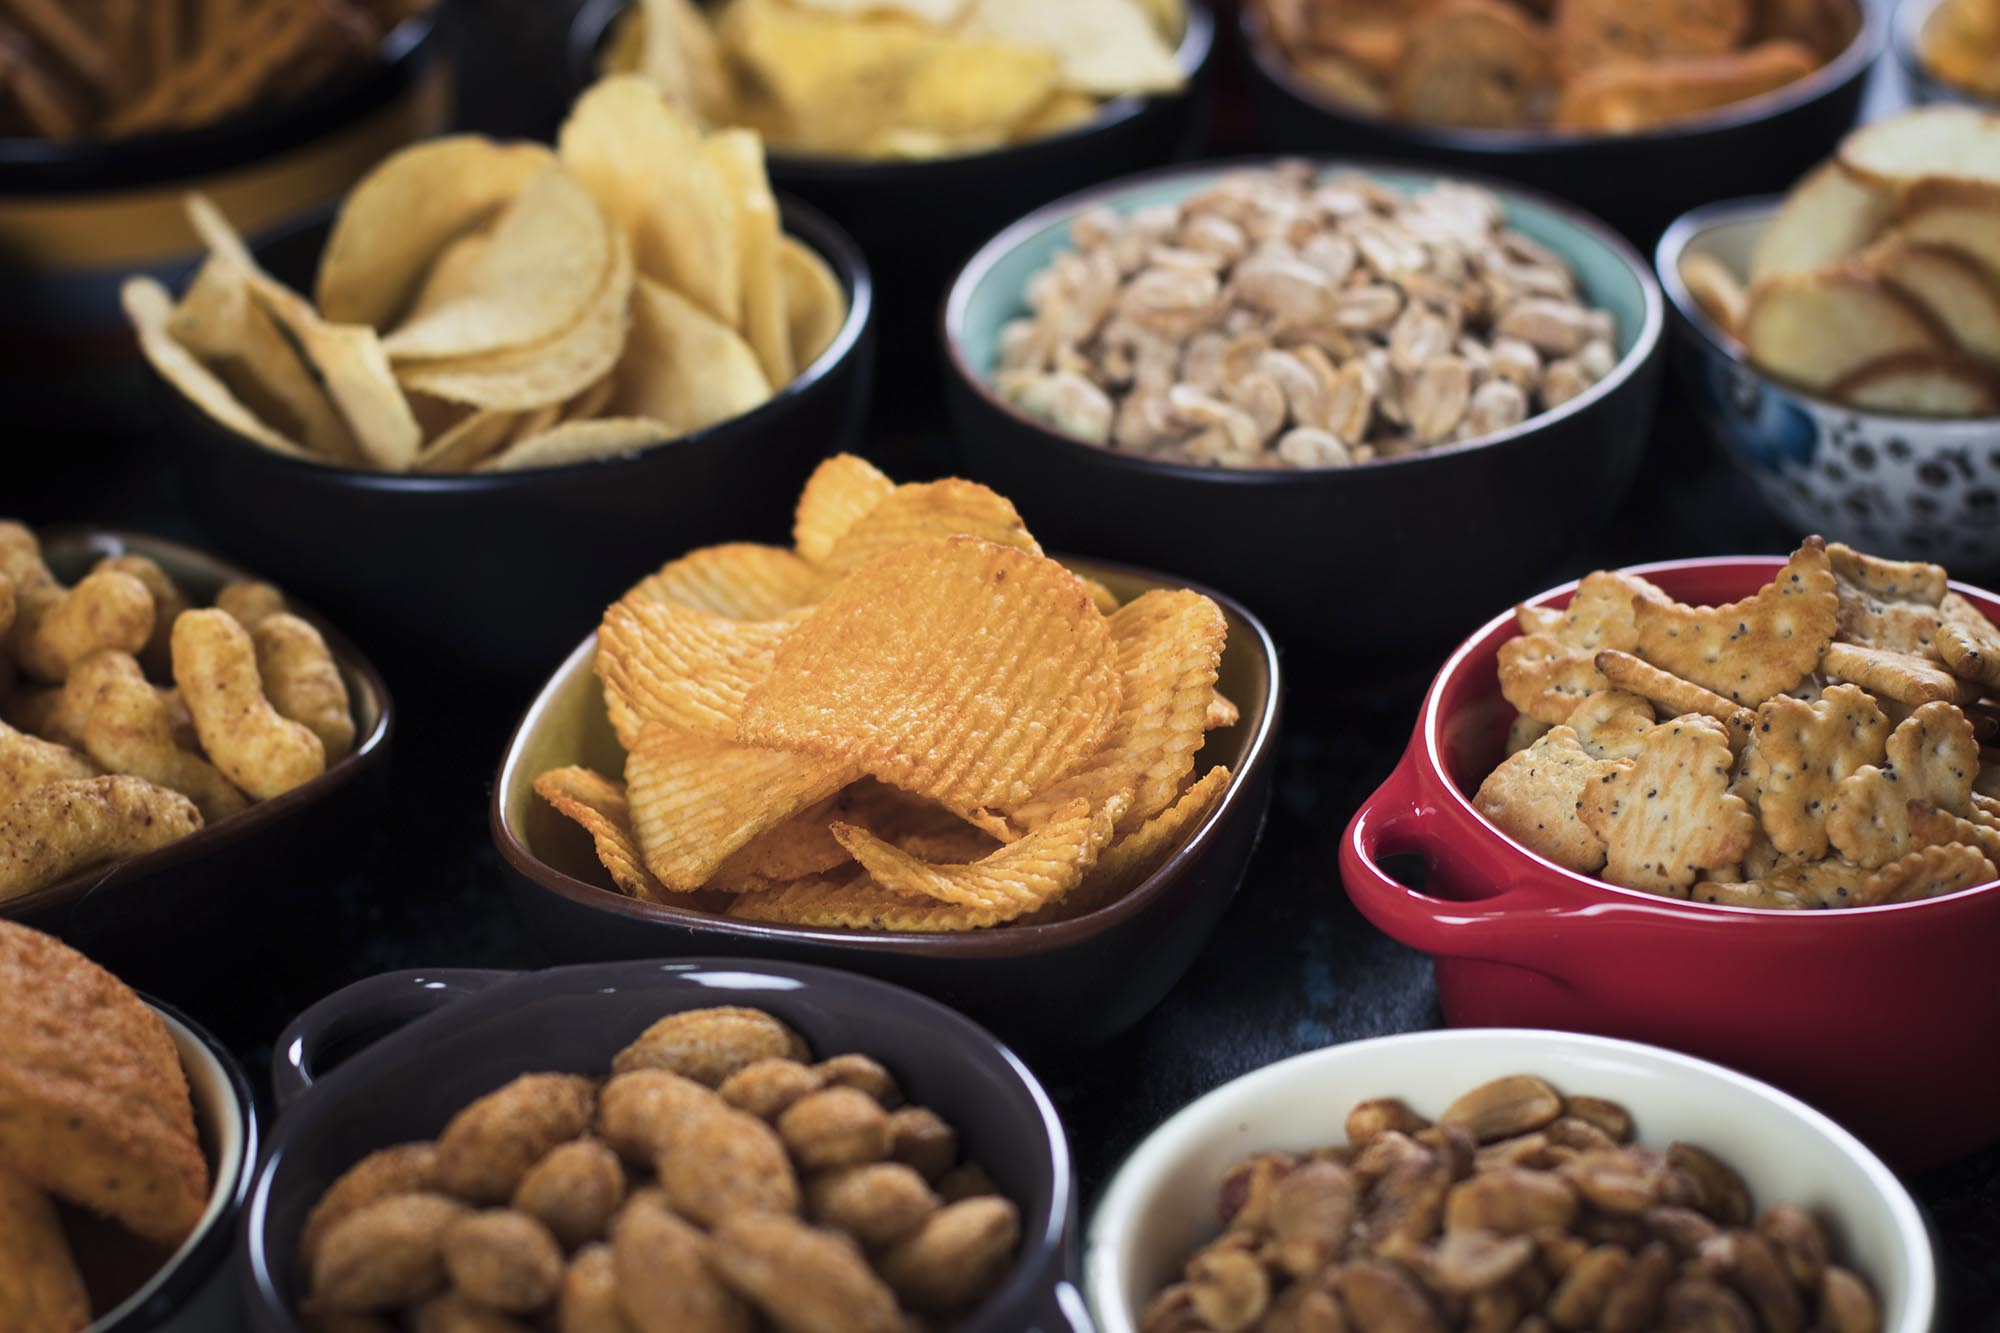 Various shaped bowls filled with various snacks including chips, nuts, crackers